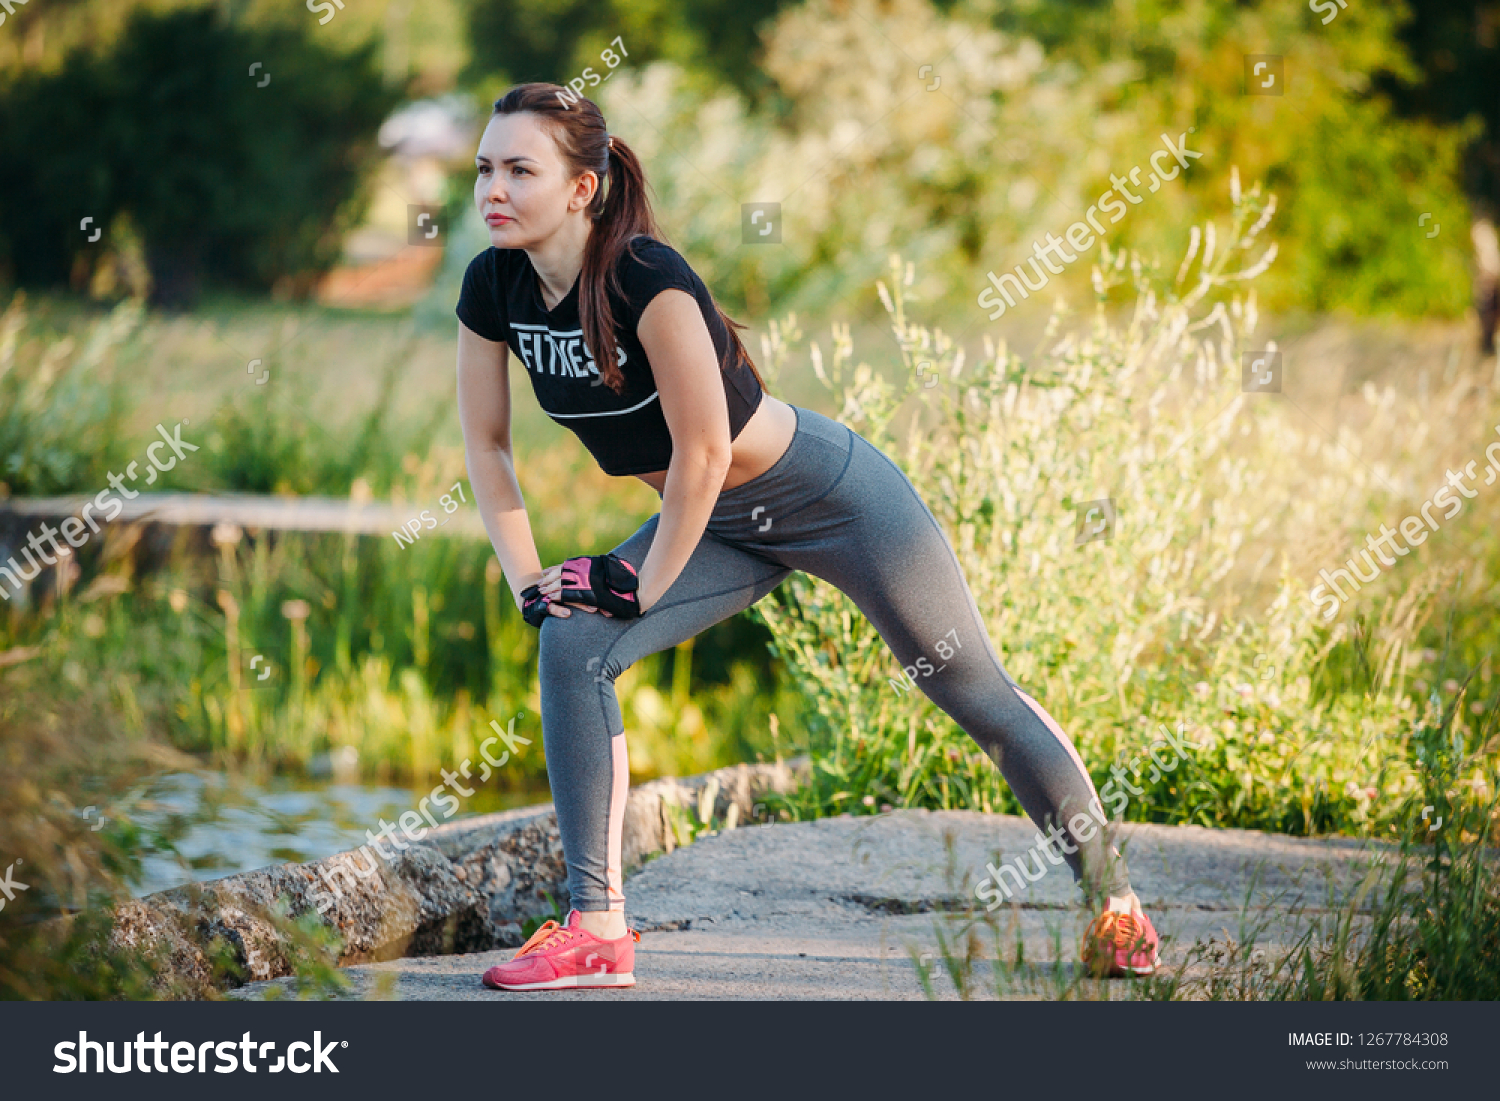 Young Woman Park Fitness Stock Photo (Edit Now) 1267784308